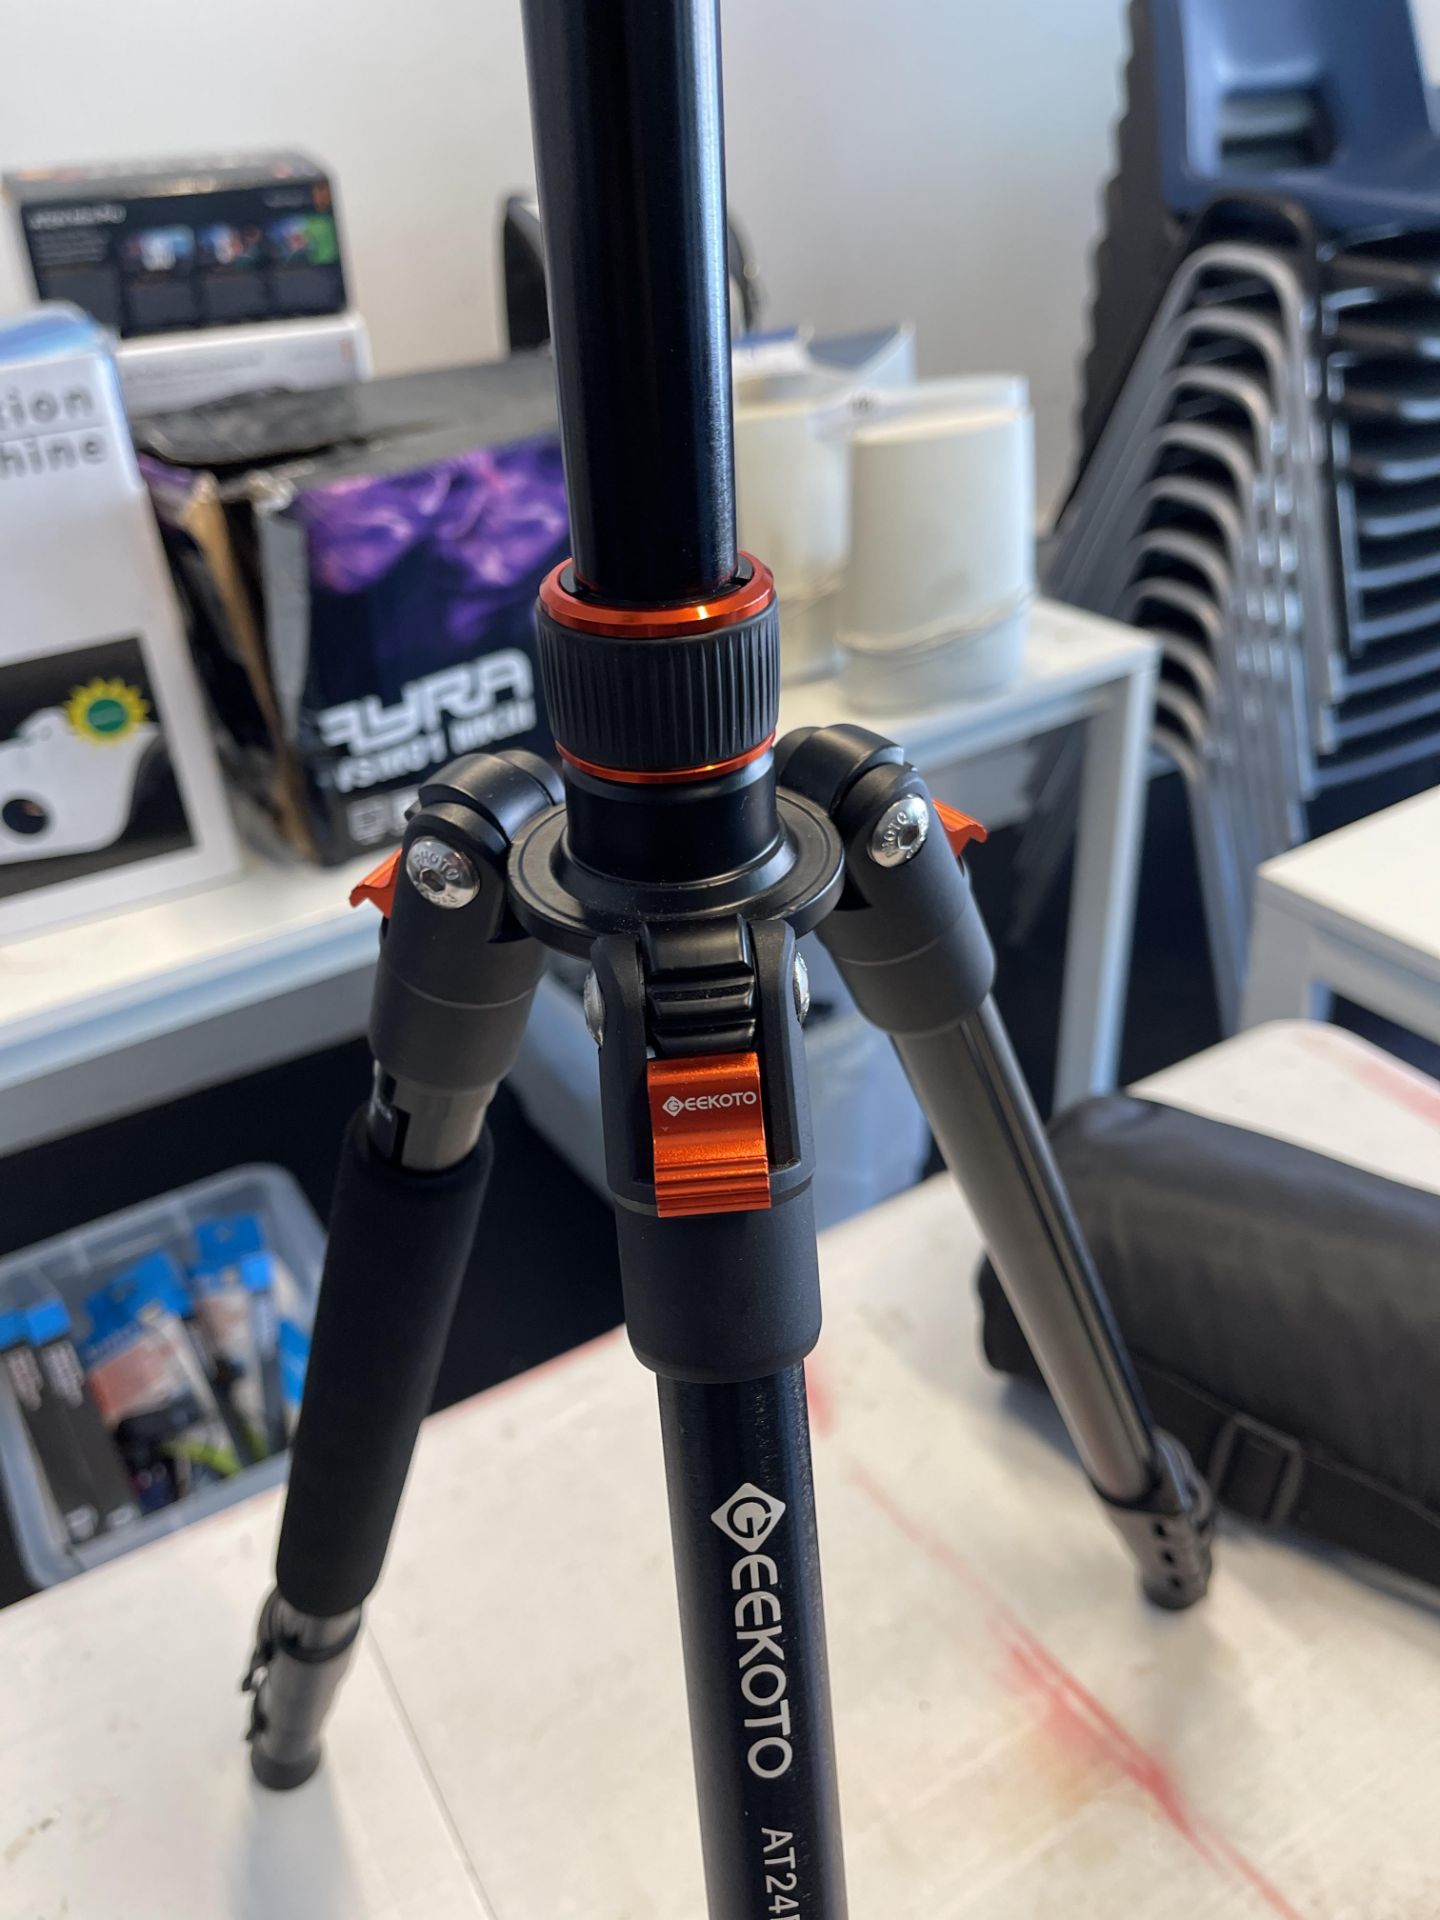 Geekoto AT24Pro Dreamer Light Aluminum Camera Tripod with 360 Panorama Ball Head. (180£) with Case - Image 3 of 6